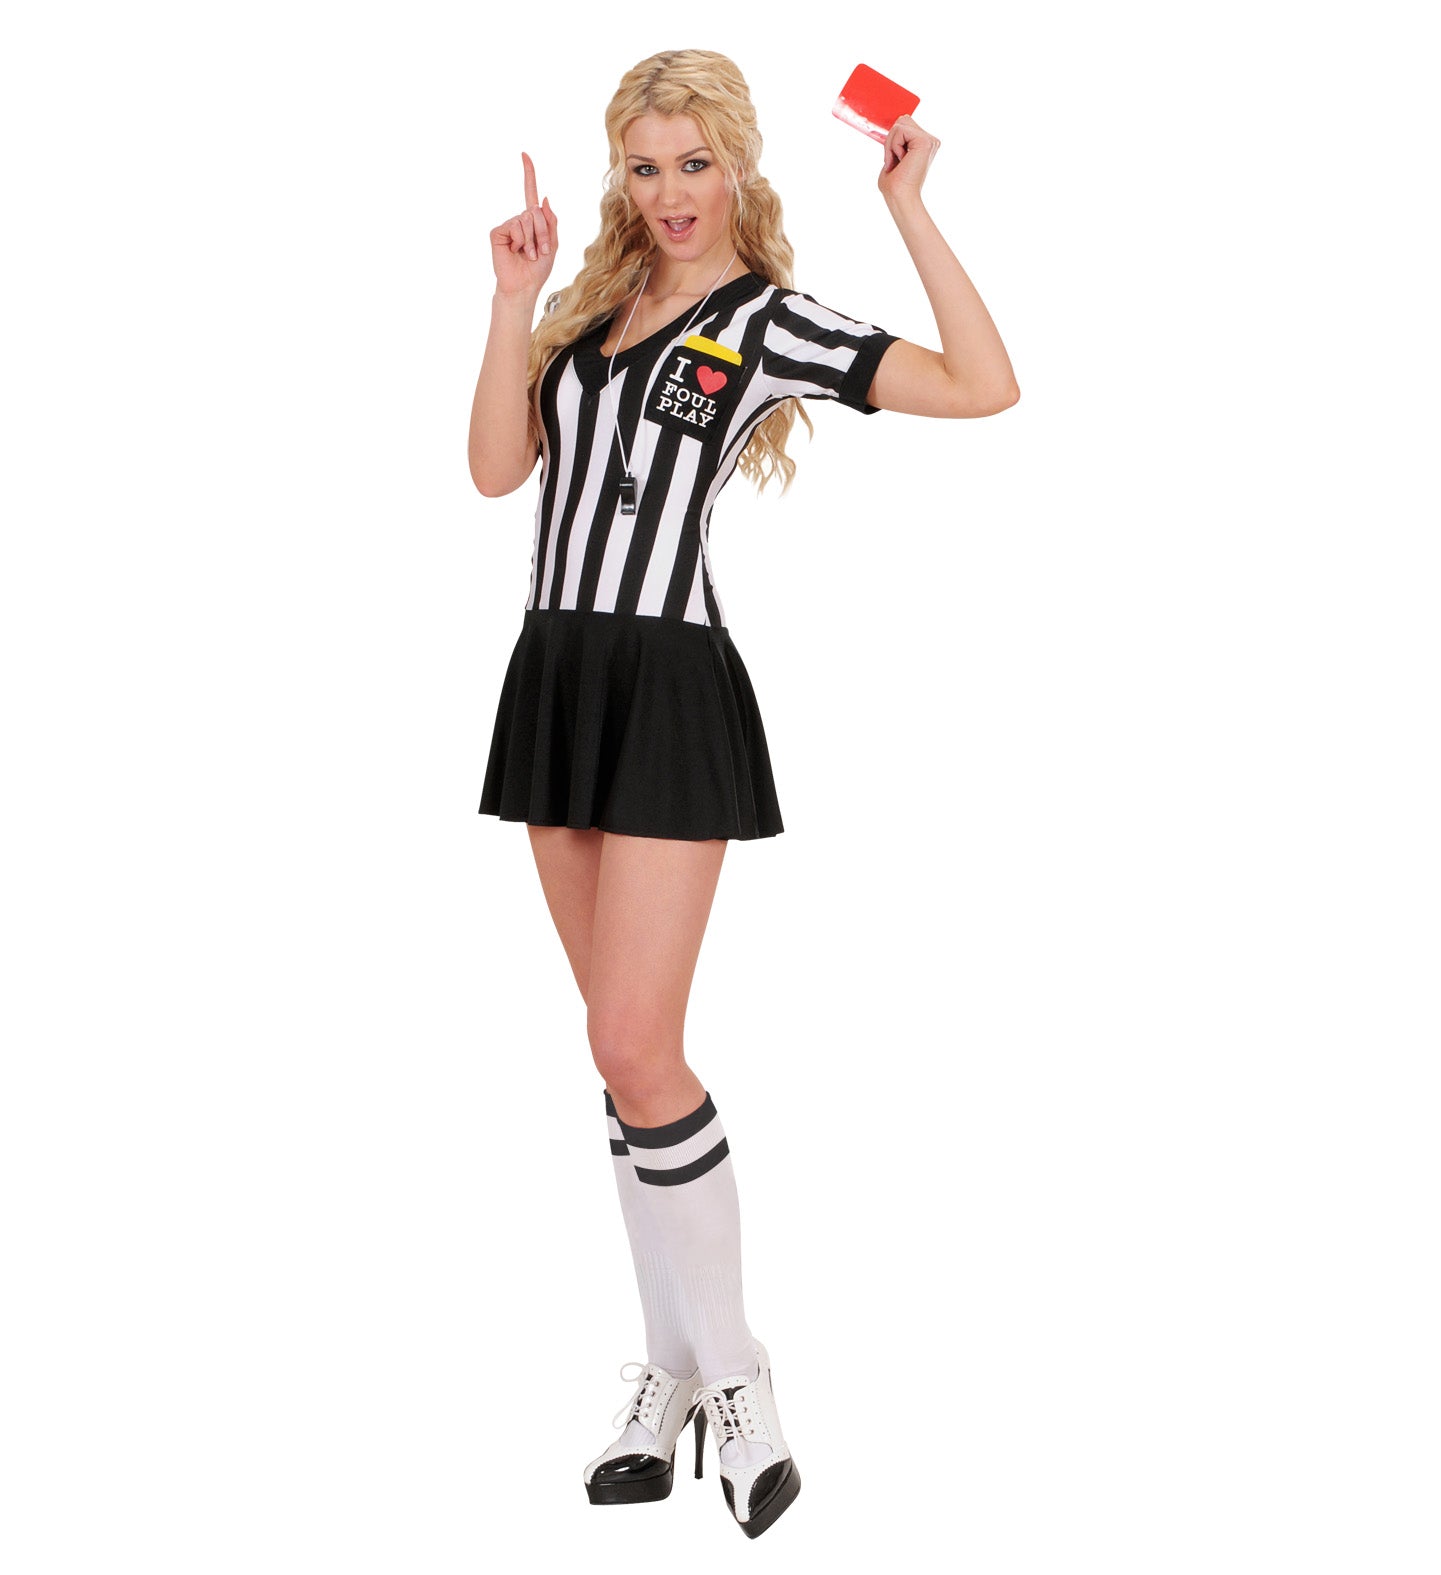 Foul Play Referee fancy dress outfit for women